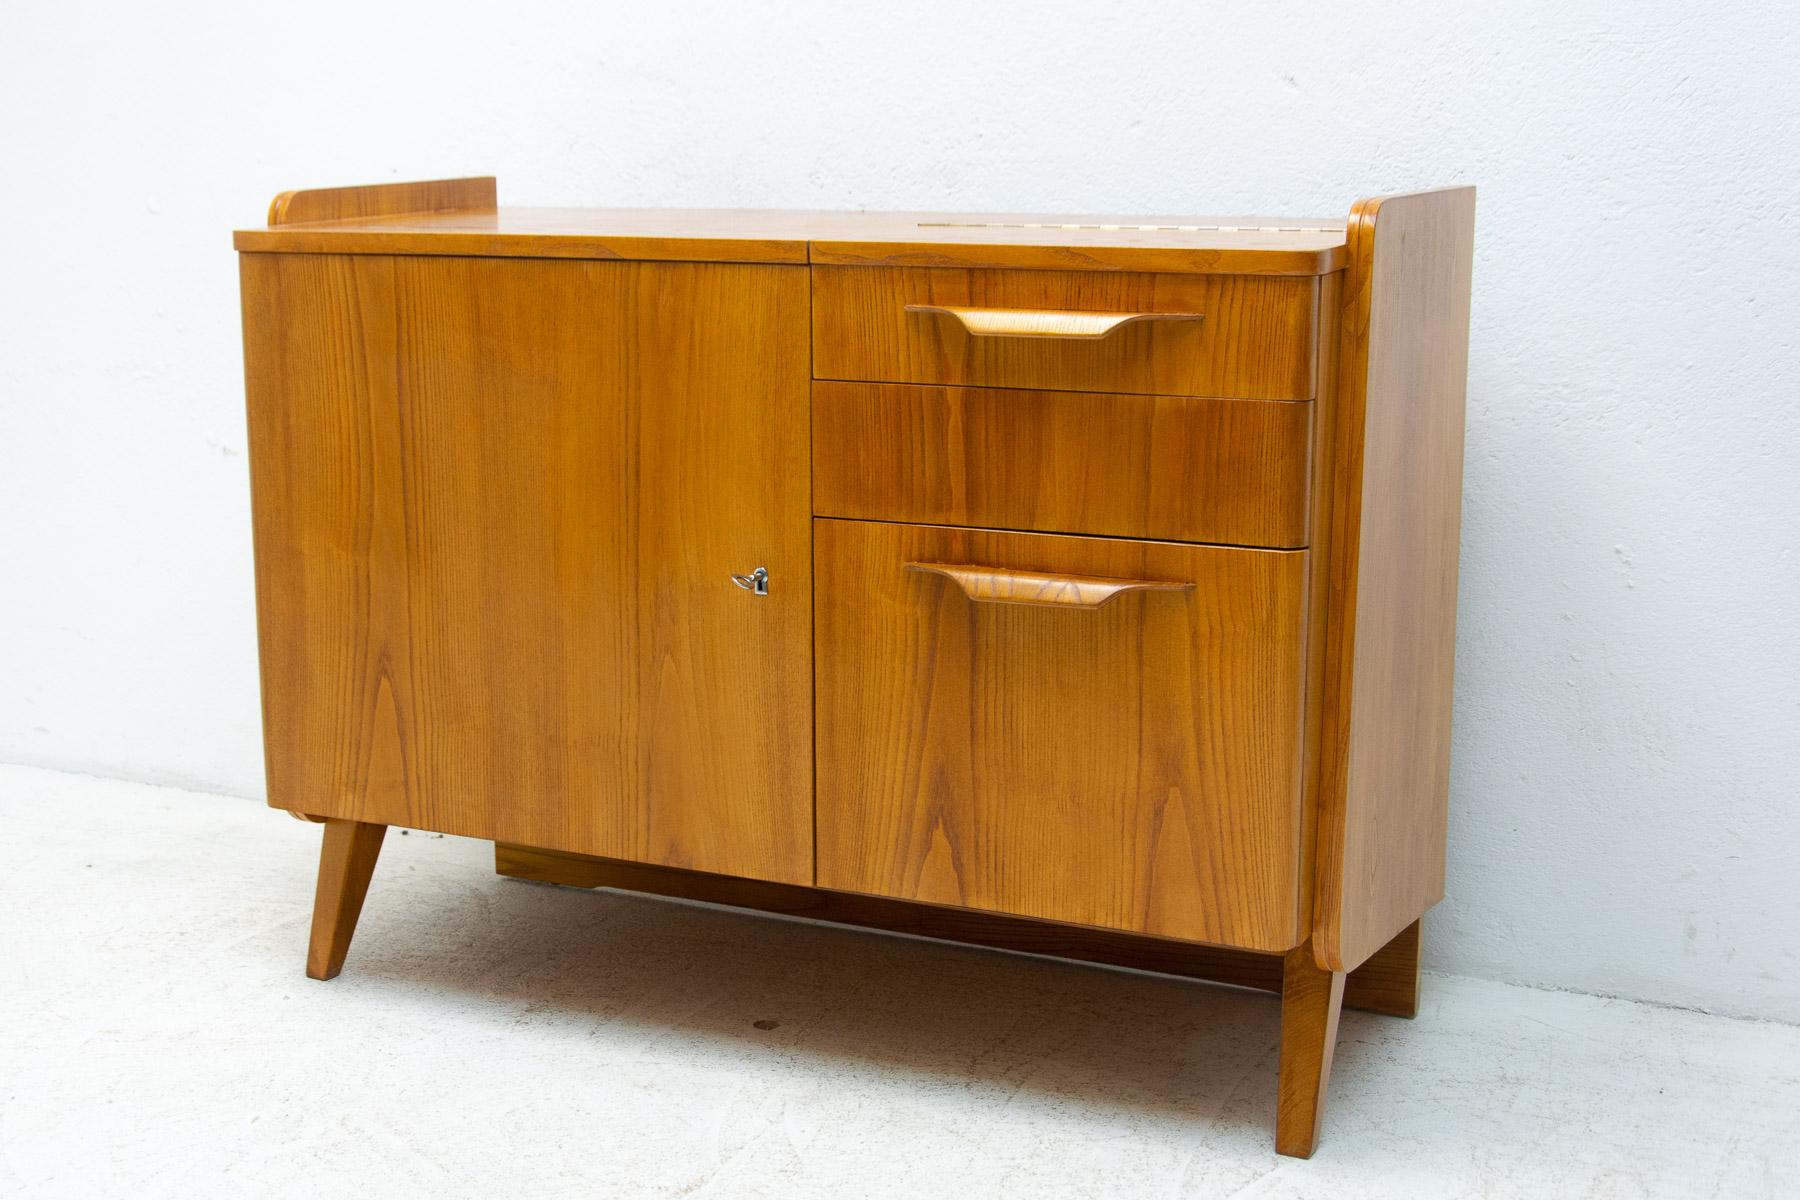 Mid century Vintage small cabinet or TV table from the 1960´s. It was designed by František Jirák and was manufactured by Tatra nábytok company in the former Czechoslovakia. Walnut veneer, plywood. In good condition.

Height: 79 cm

width: 106